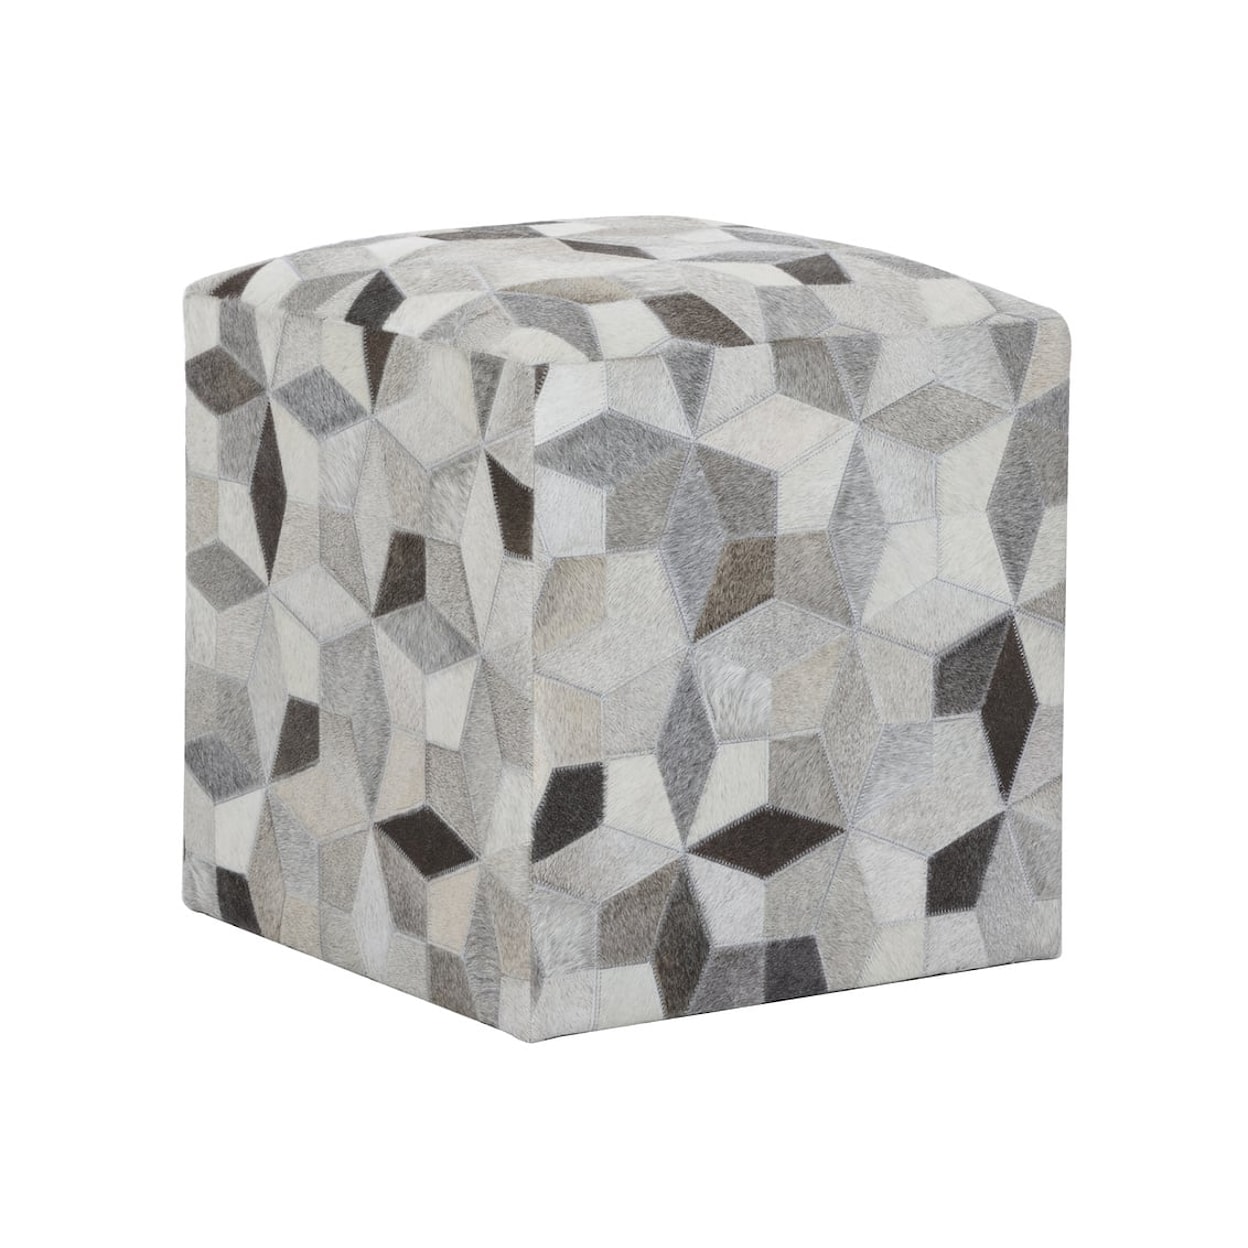 Wildwood Lamps Accent Seating SHINE BRIGHT LIKE A DIAMOND POUF